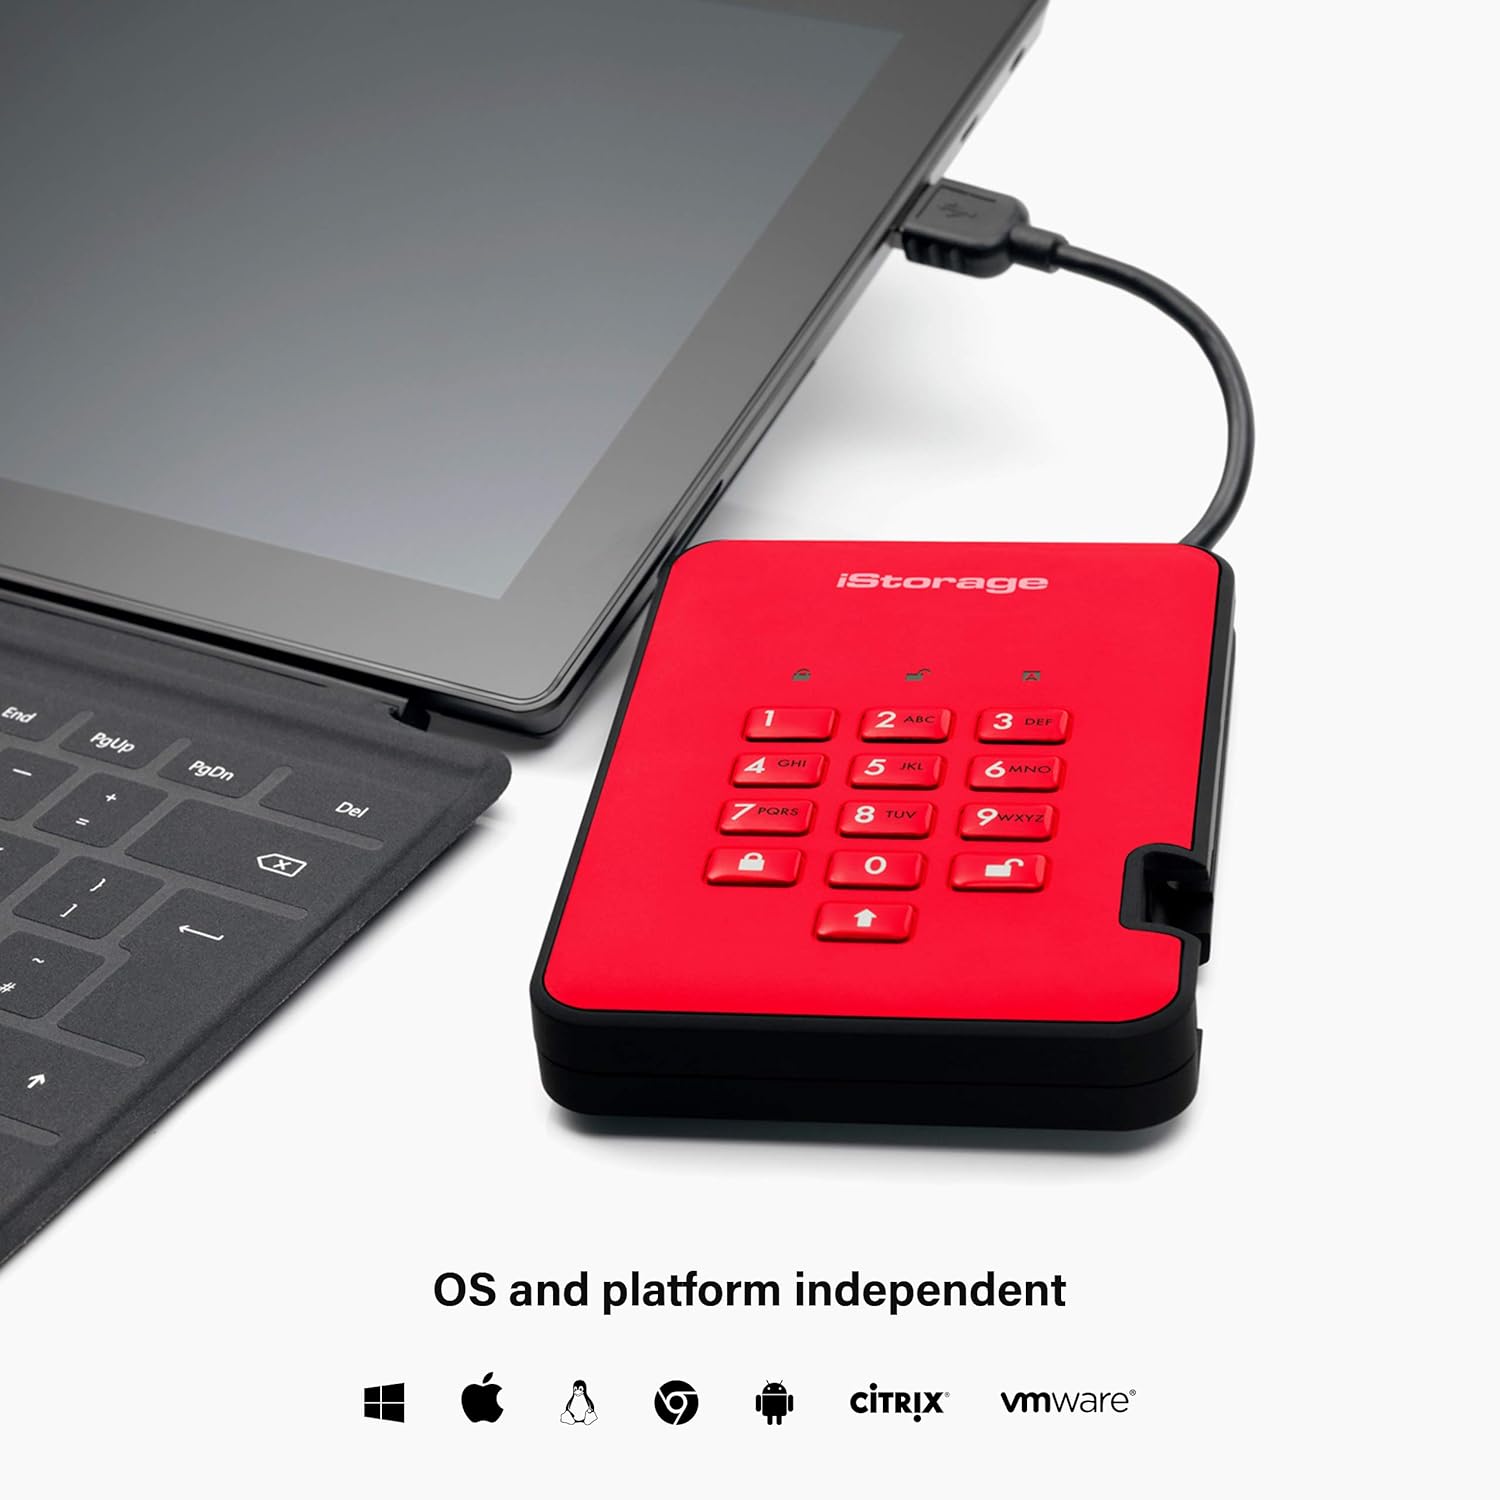 iStorage diskAshur2 HDD 2TB Red - Secure portable hard drive - Password protected, dust and water resistant, portable, military grade hardware encryption USB 3.1 IS-DA2-256-2000-R